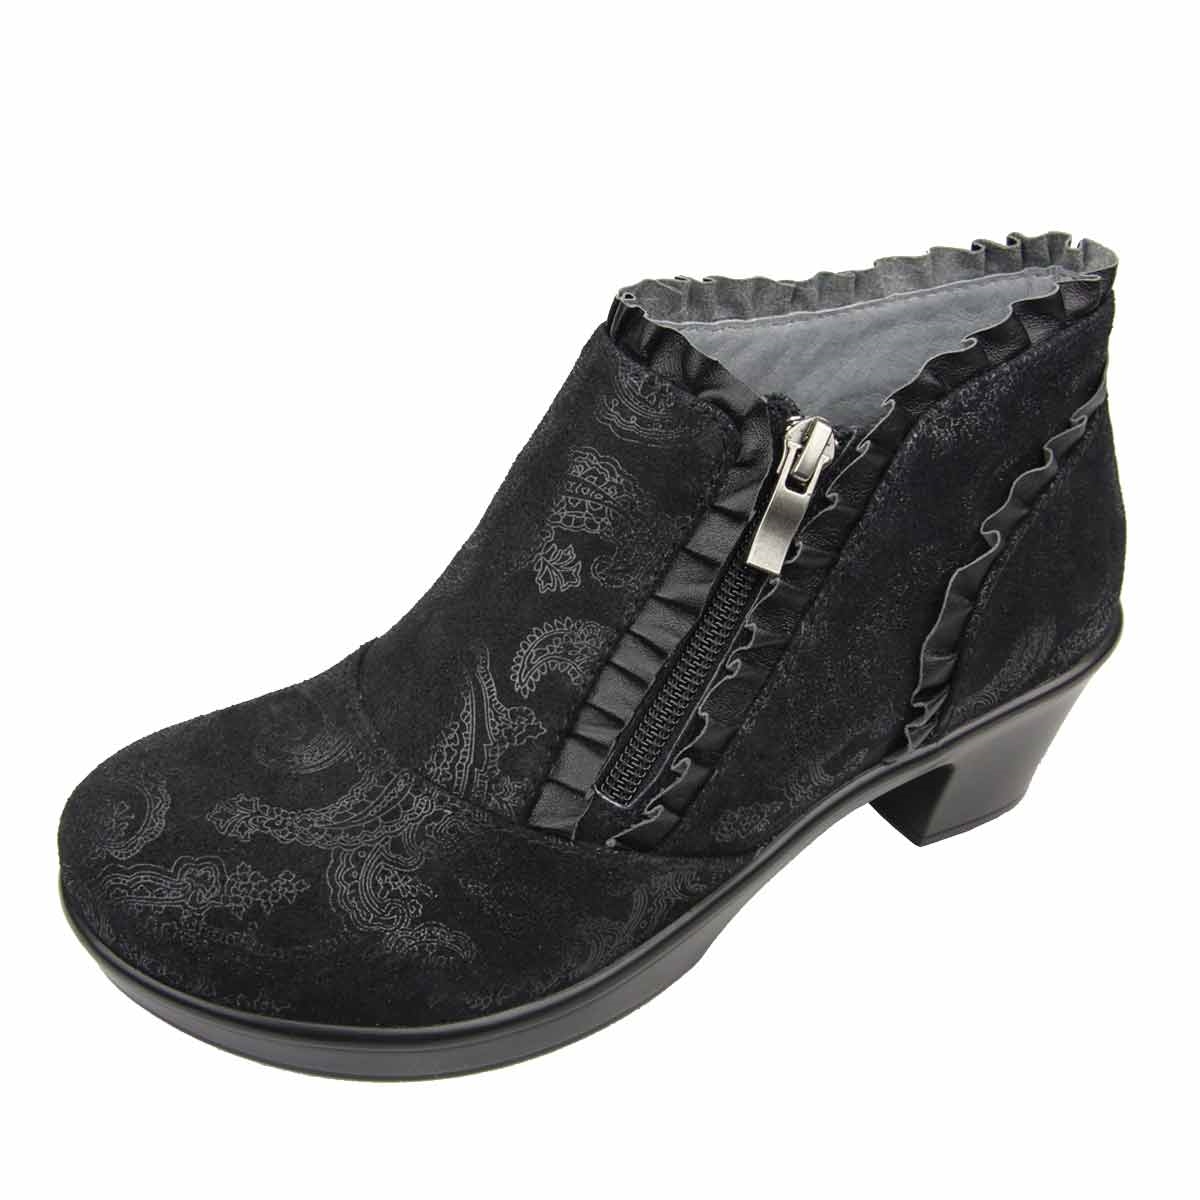 alegria boots on sale